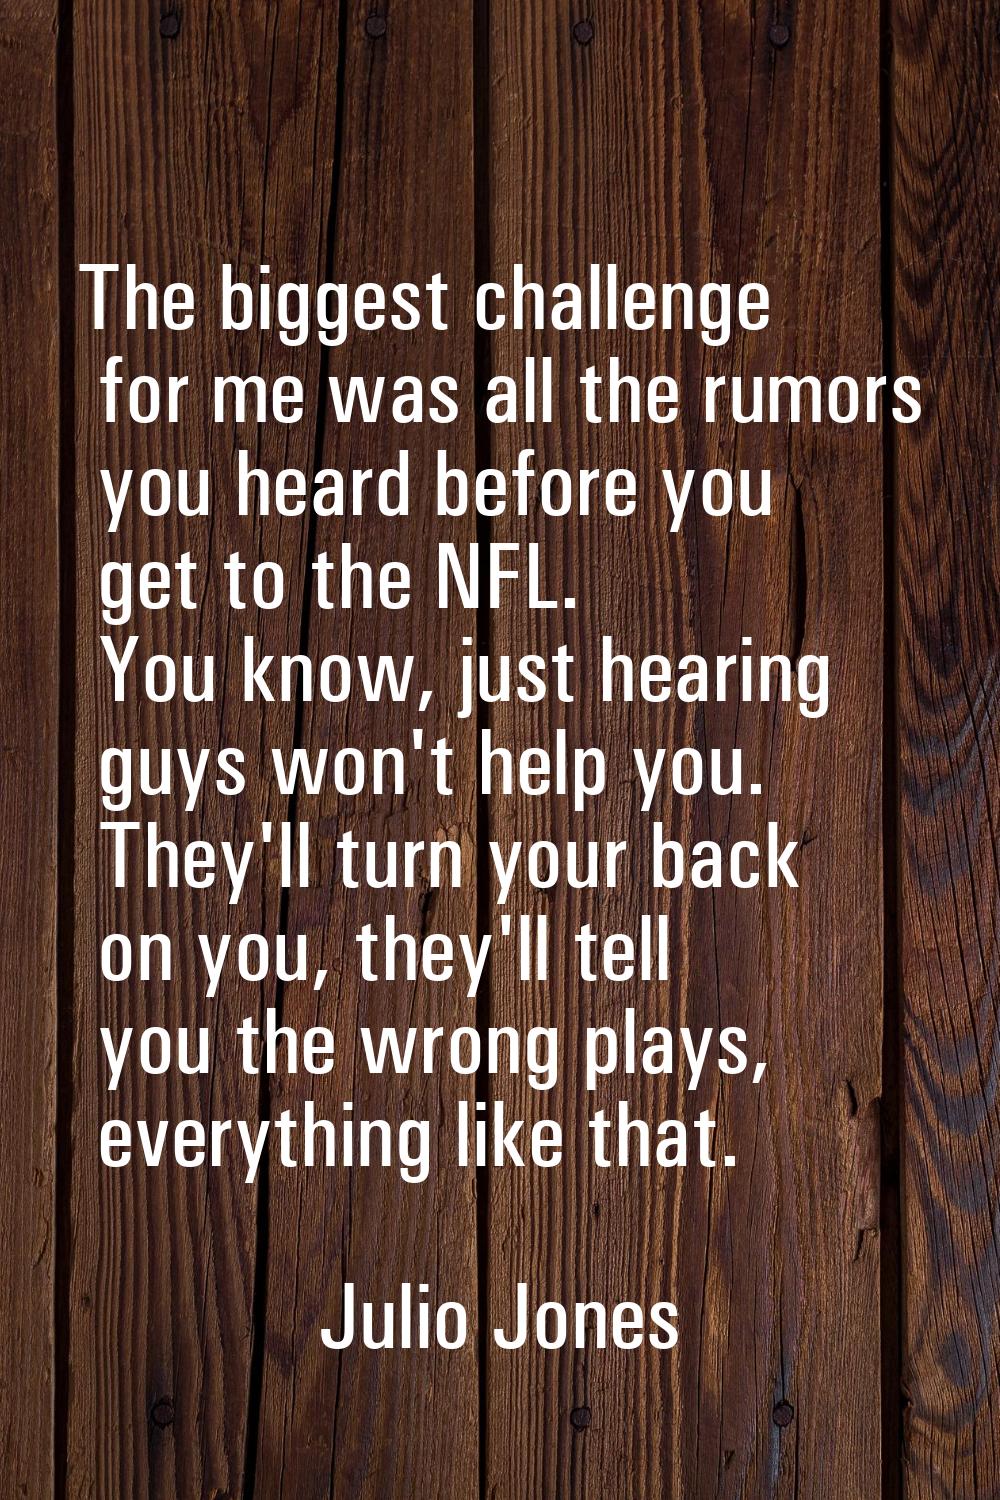 The biggest challenge for me was all the rumors you heard before you get to the NFL. You know, just